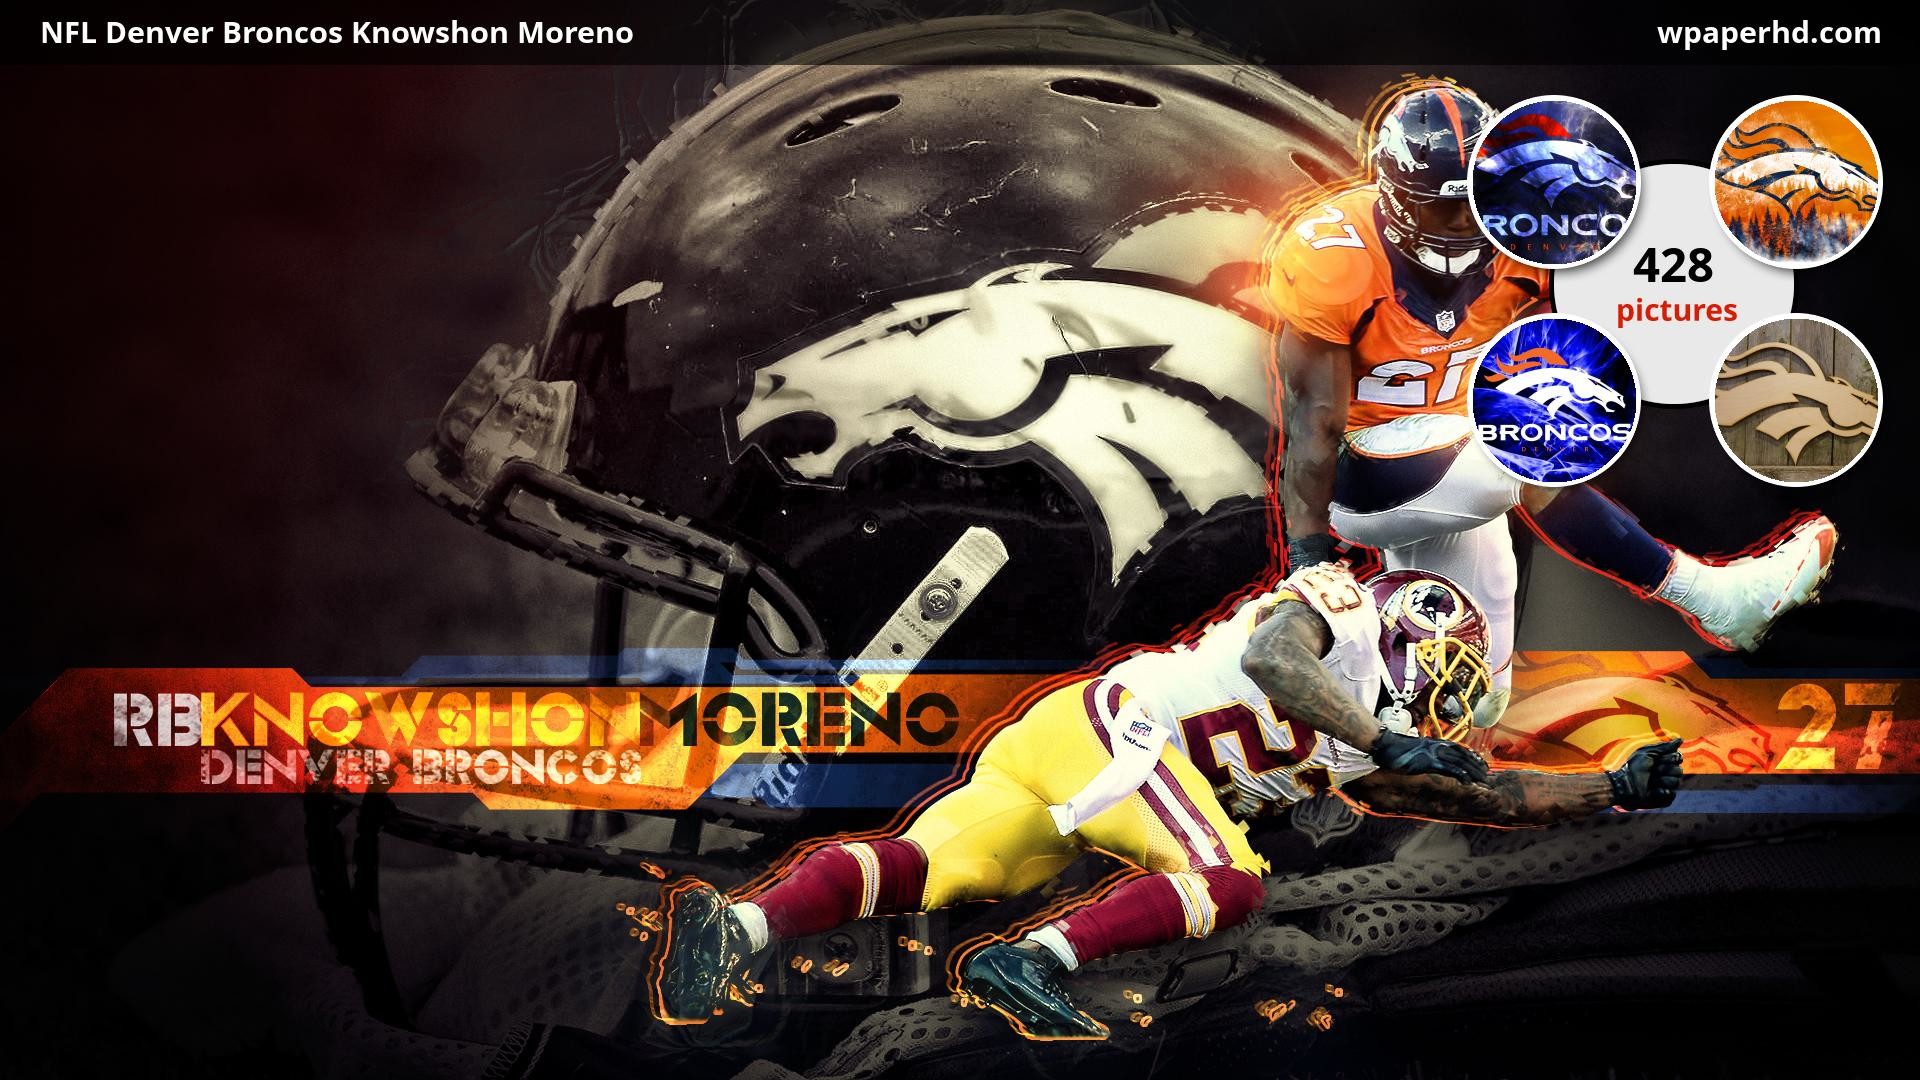 1920x1080 ... Denver Broncos Knowshon Moreno wallpaper, where you can download this  picture in Original size and ...